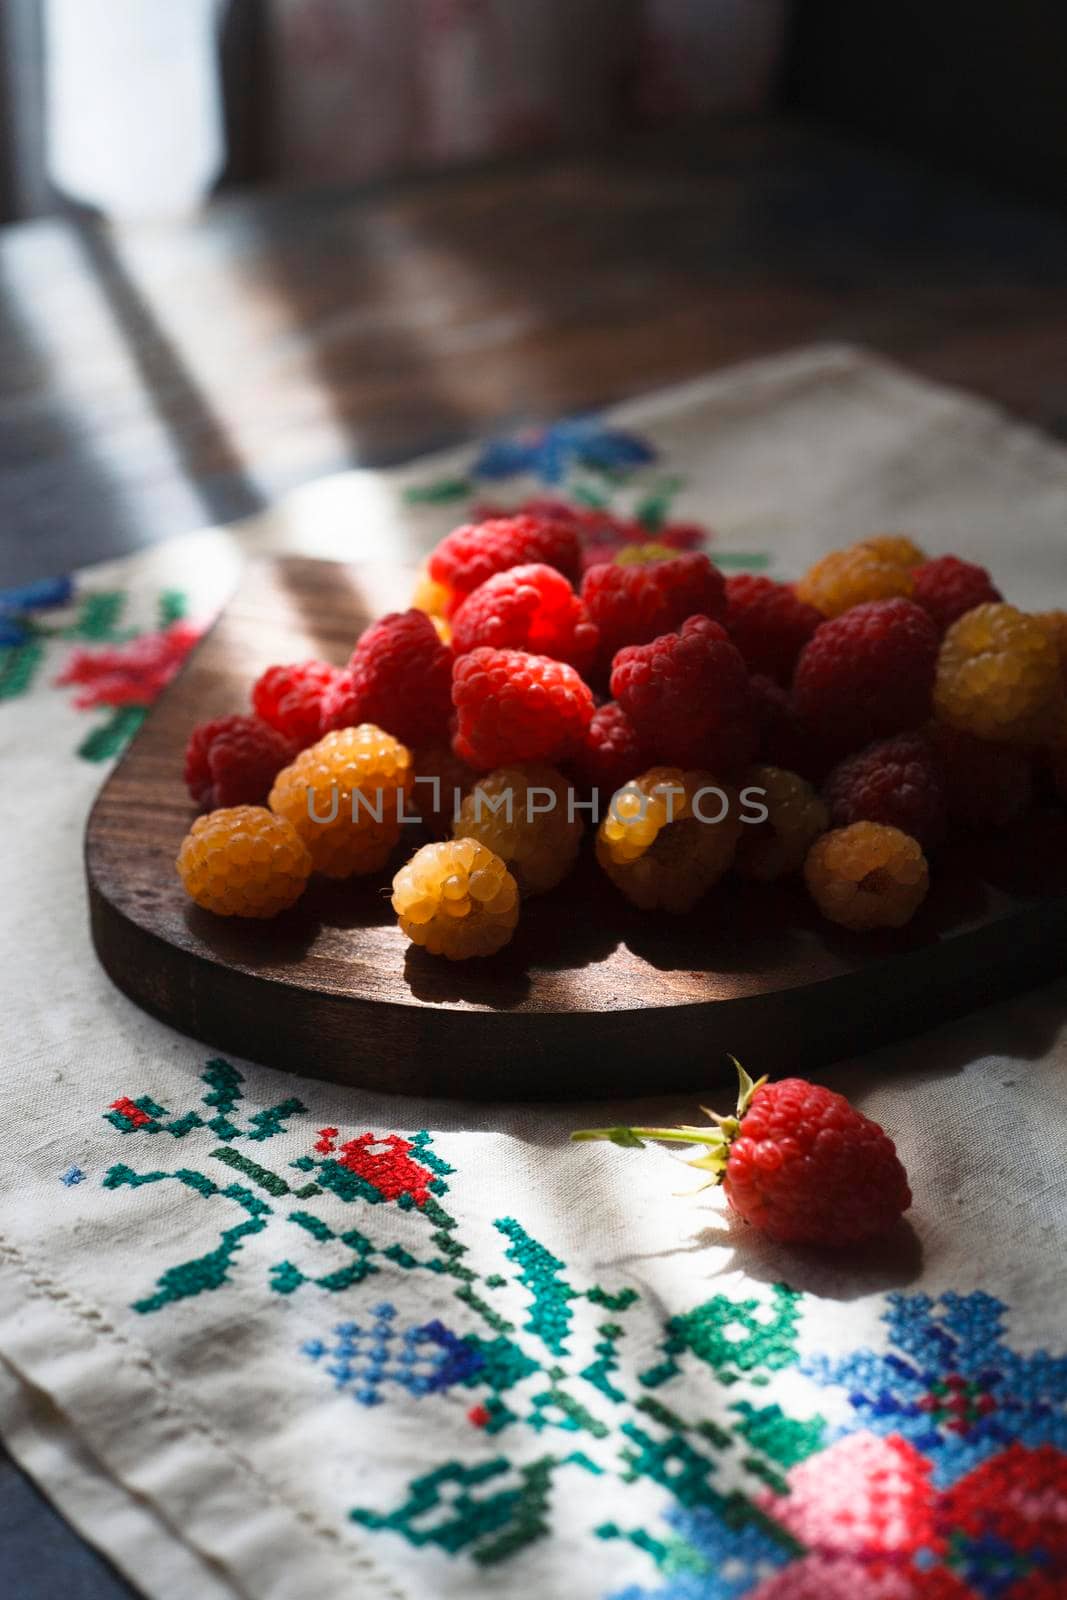 Red and yellow raspberry on wooden board on rustic embroidered towel, selective focus